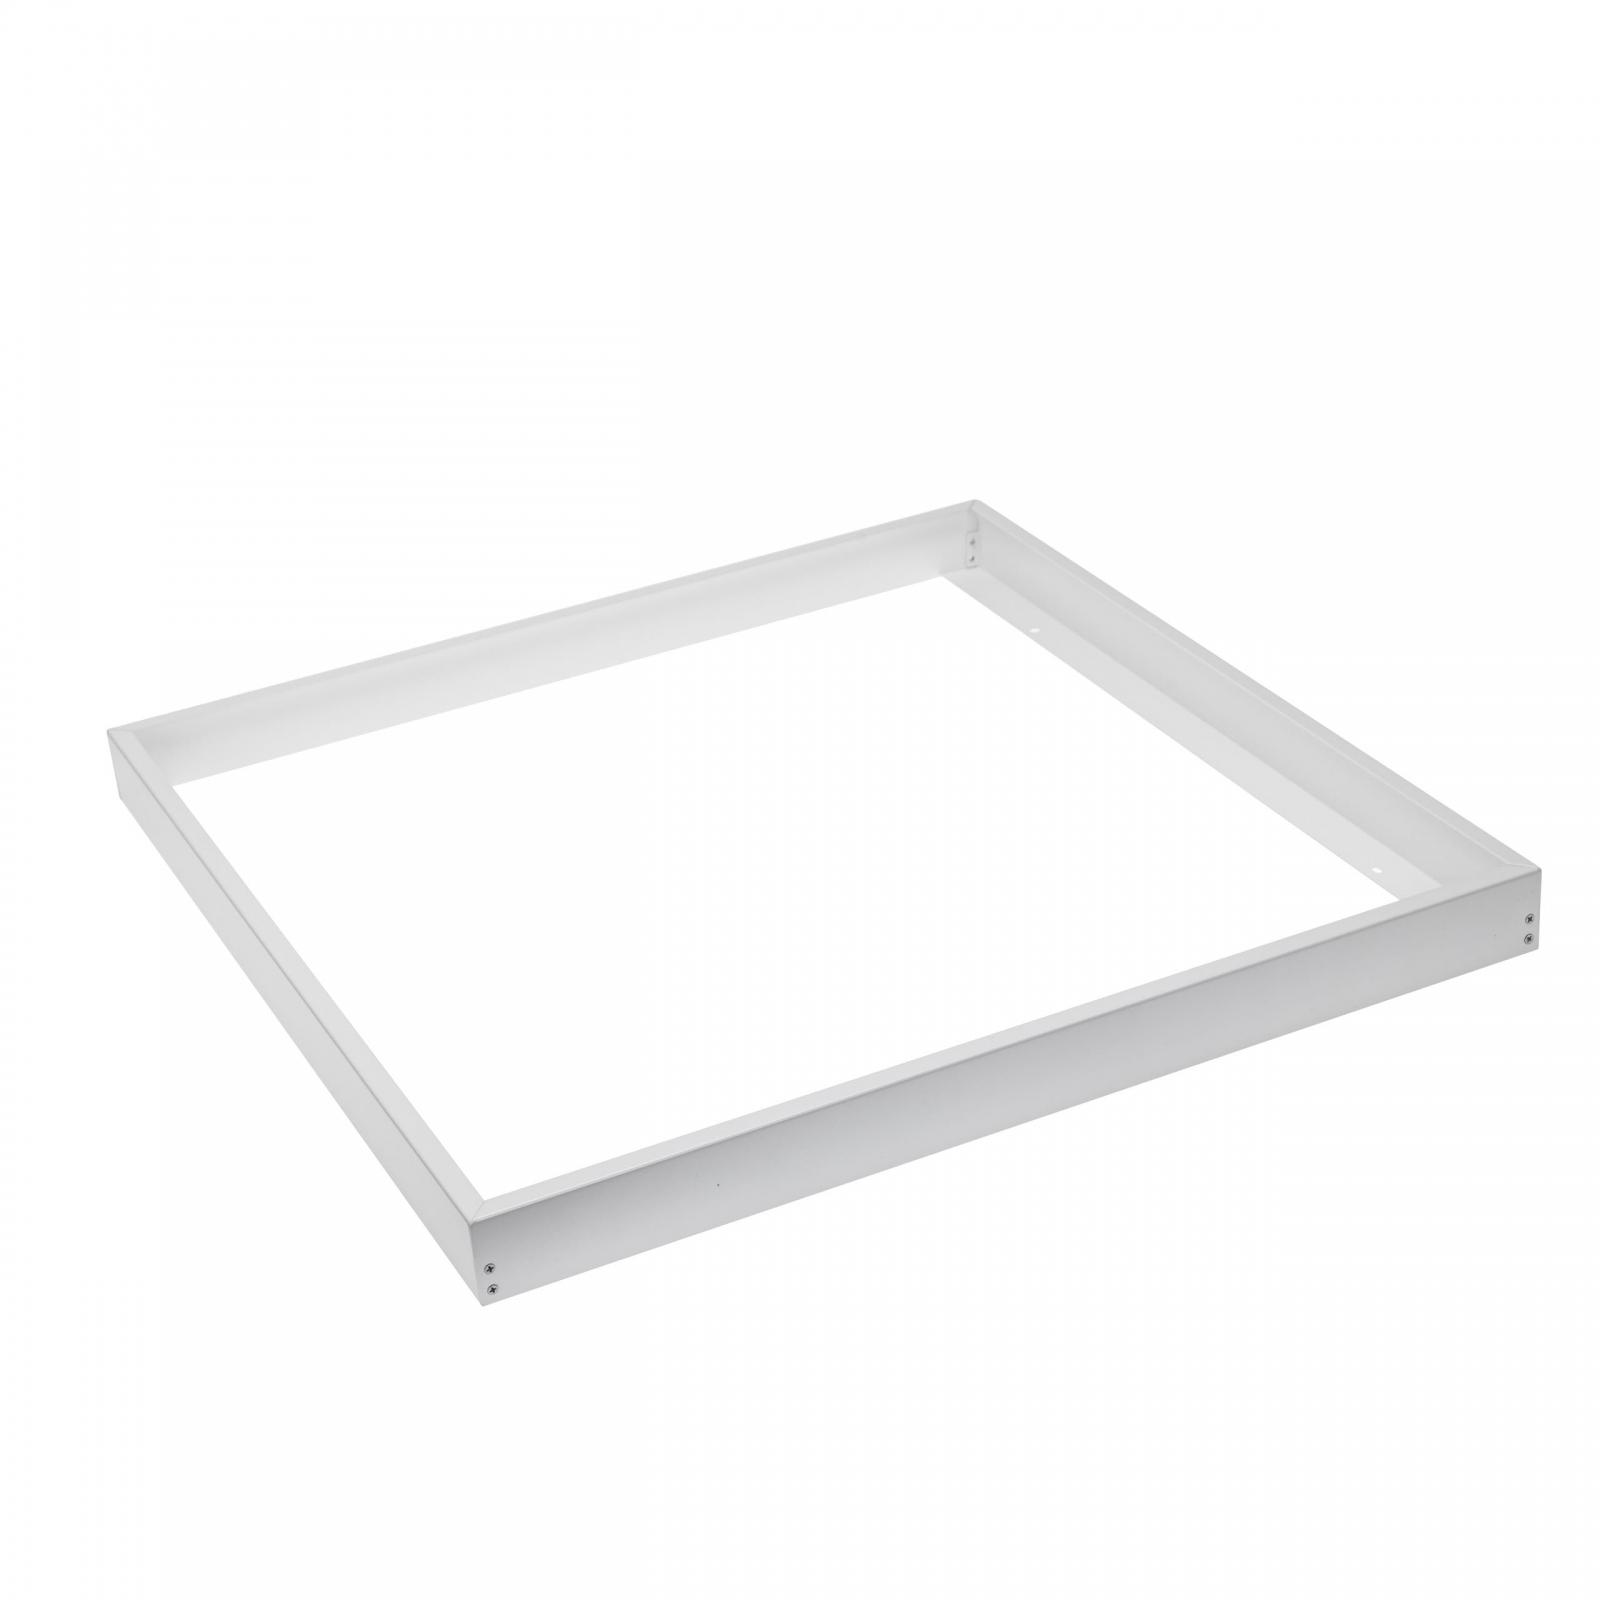 SPECTRUMLED FRAME TO MOUNTED FIXTURE SURFACE LUMINAIRE ALGINE LINE/ALGINE PREMIUM 600X600MM WITH THE SCREWS, WH ACC+035050_FRAME